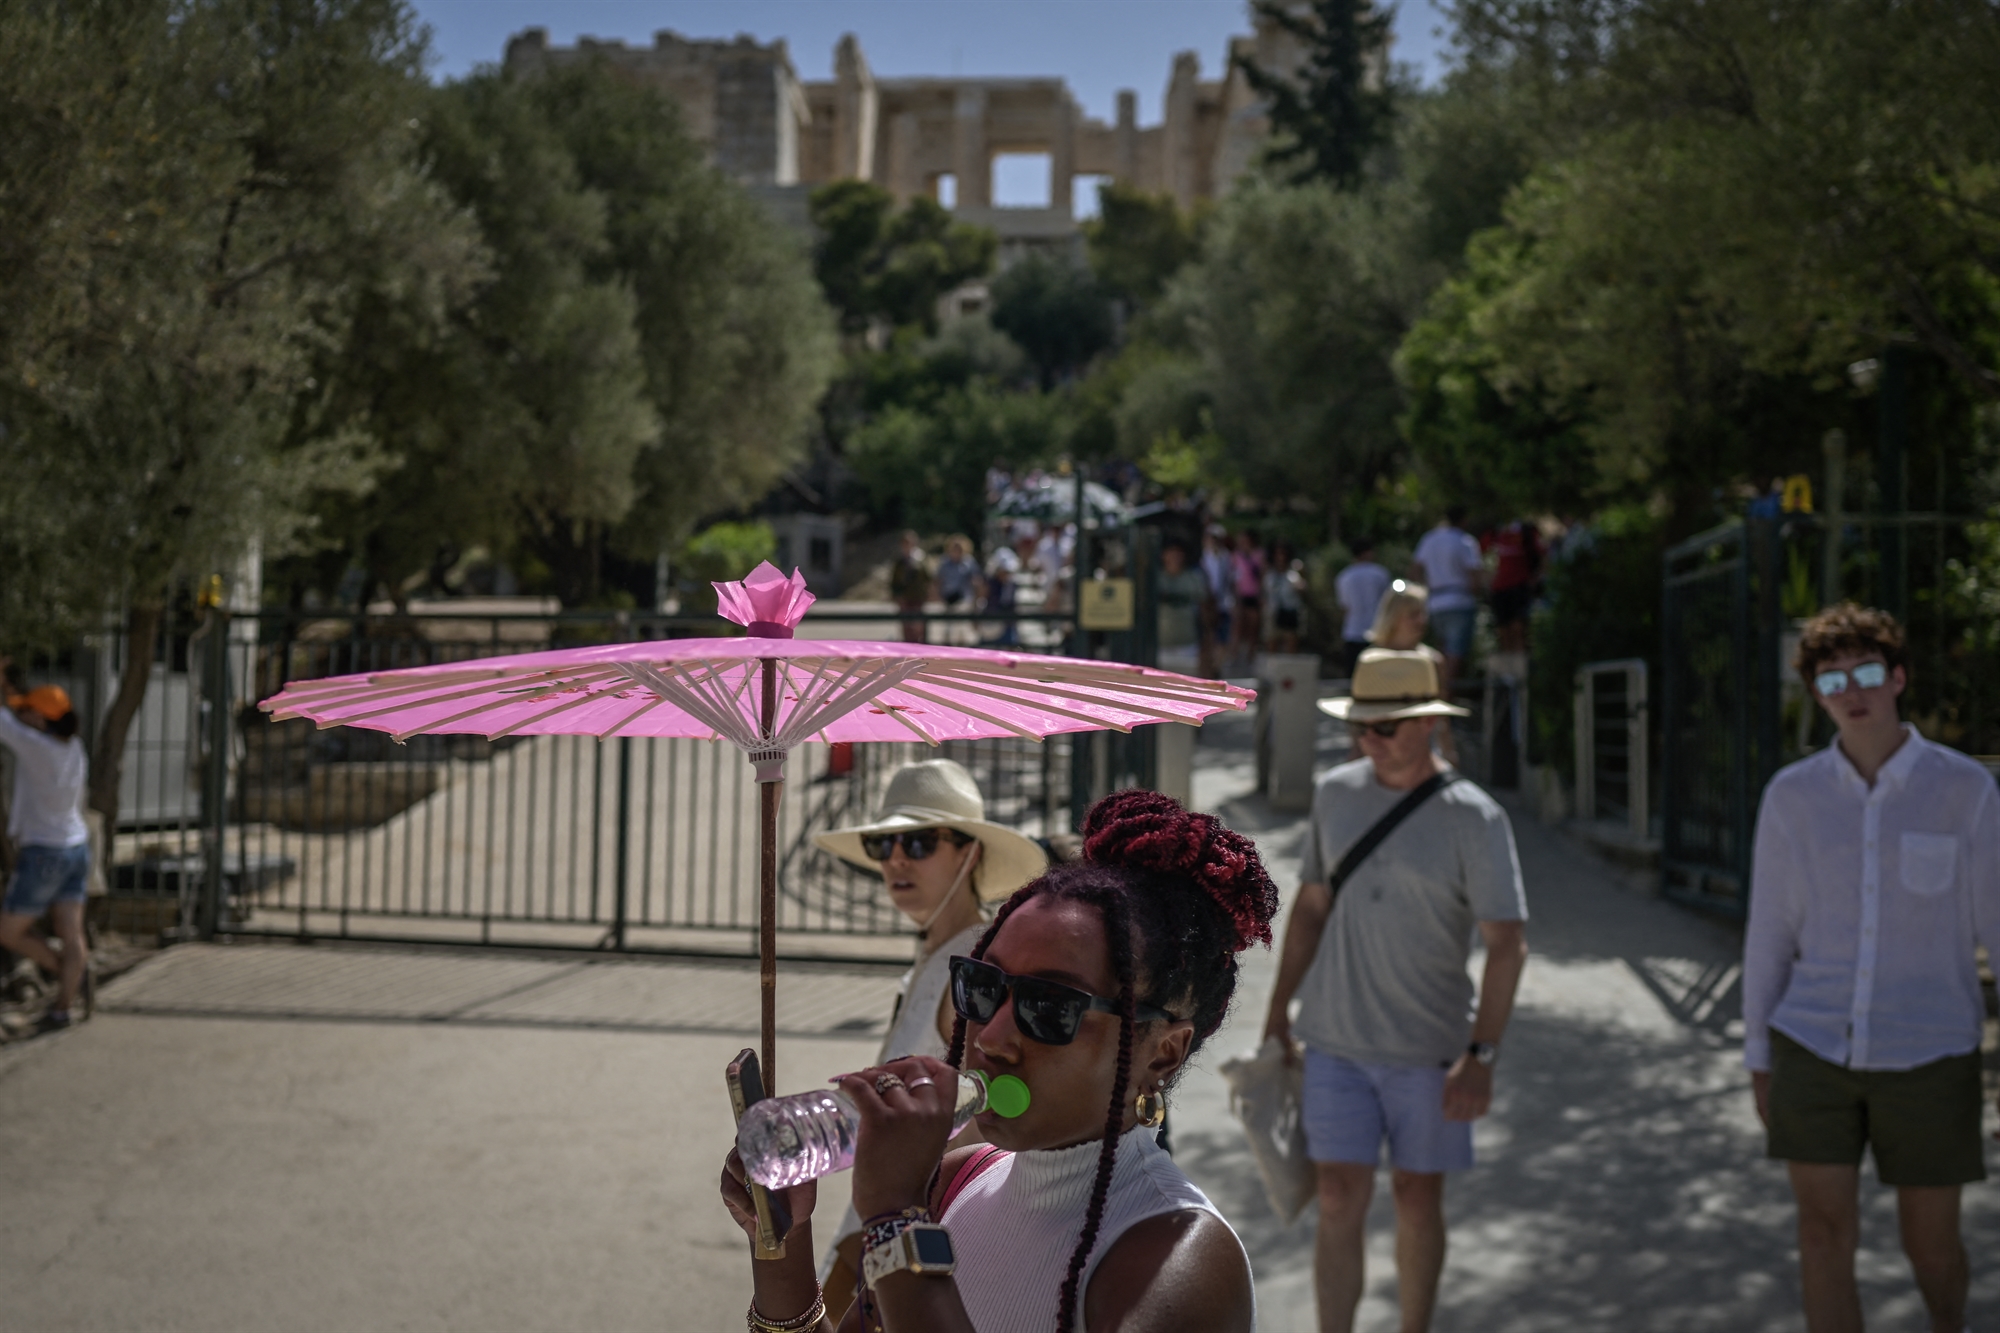 Athens’ tourism miracle getting warped in the heat